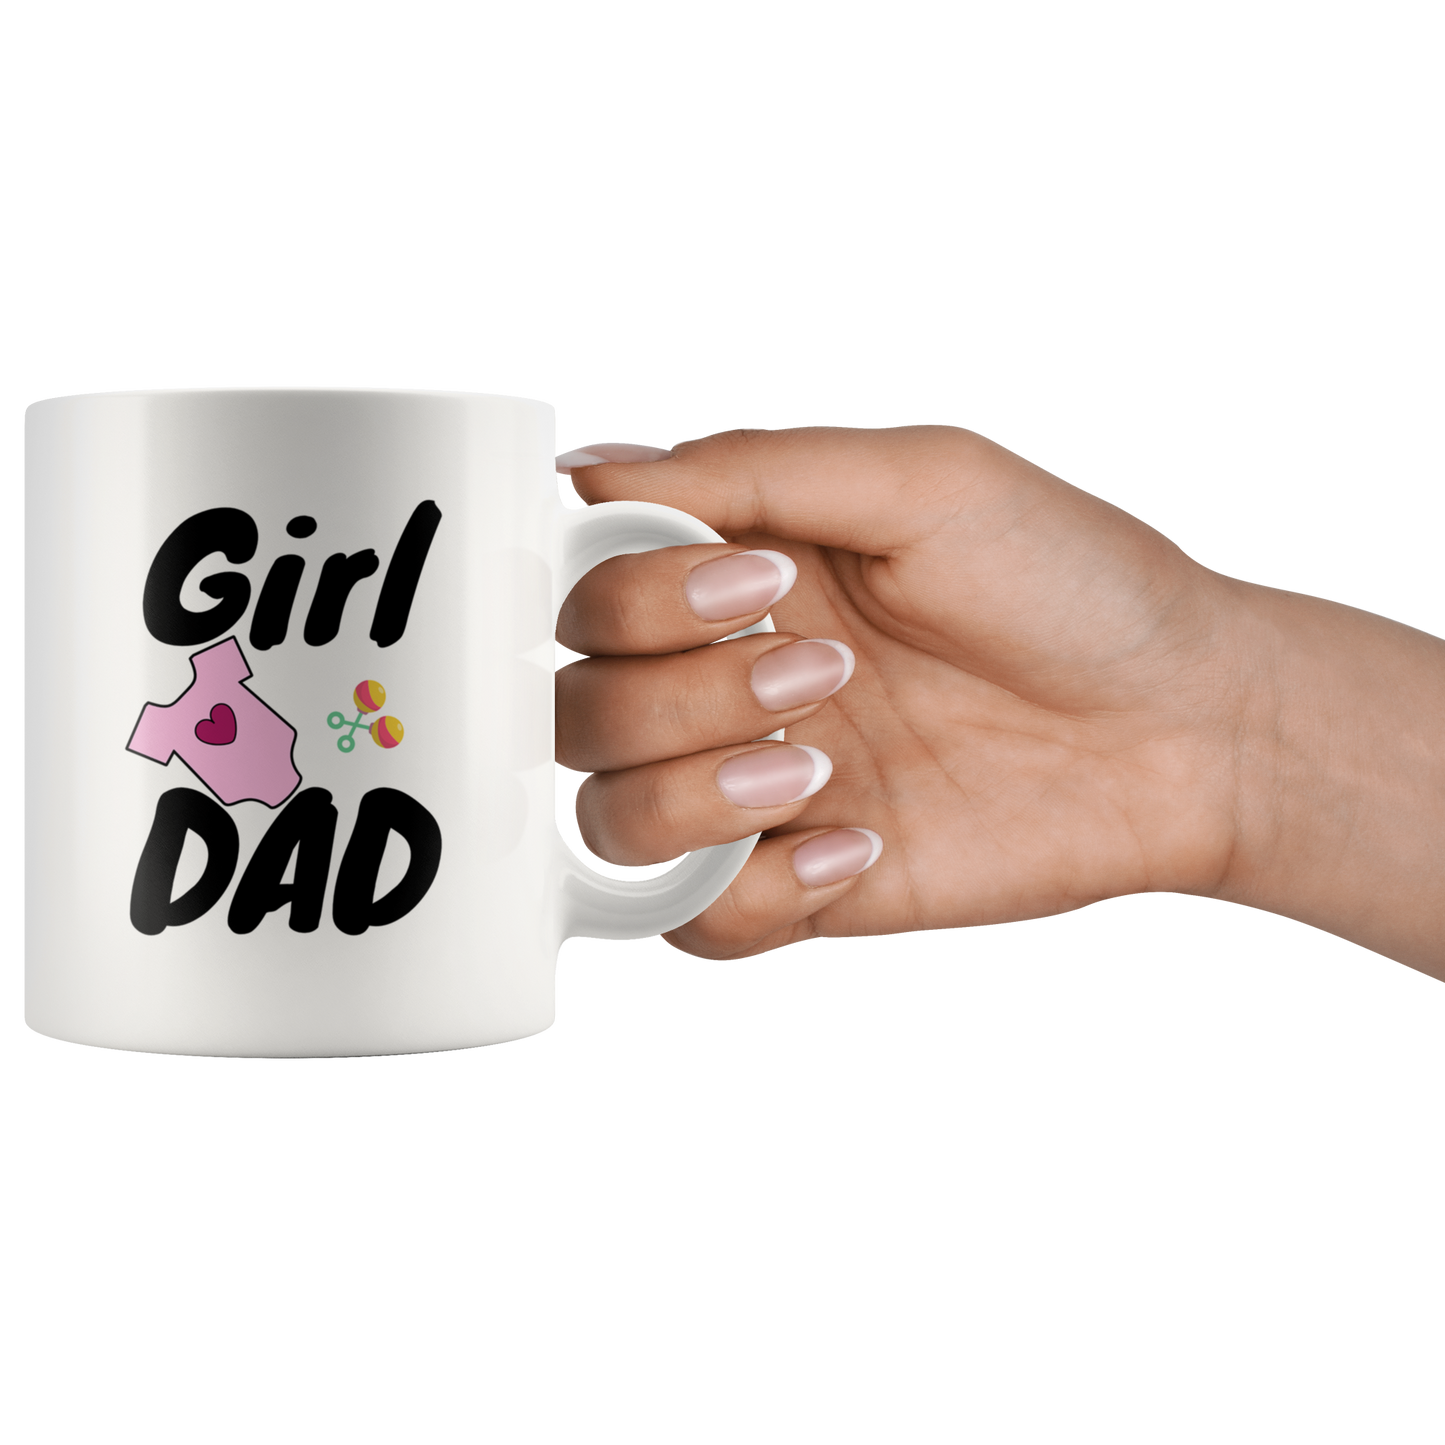 Dad Mug - 'Girl Dad' (Black) - Makes a great gift for Birthdays, Christmas, Father's Day or anytime!